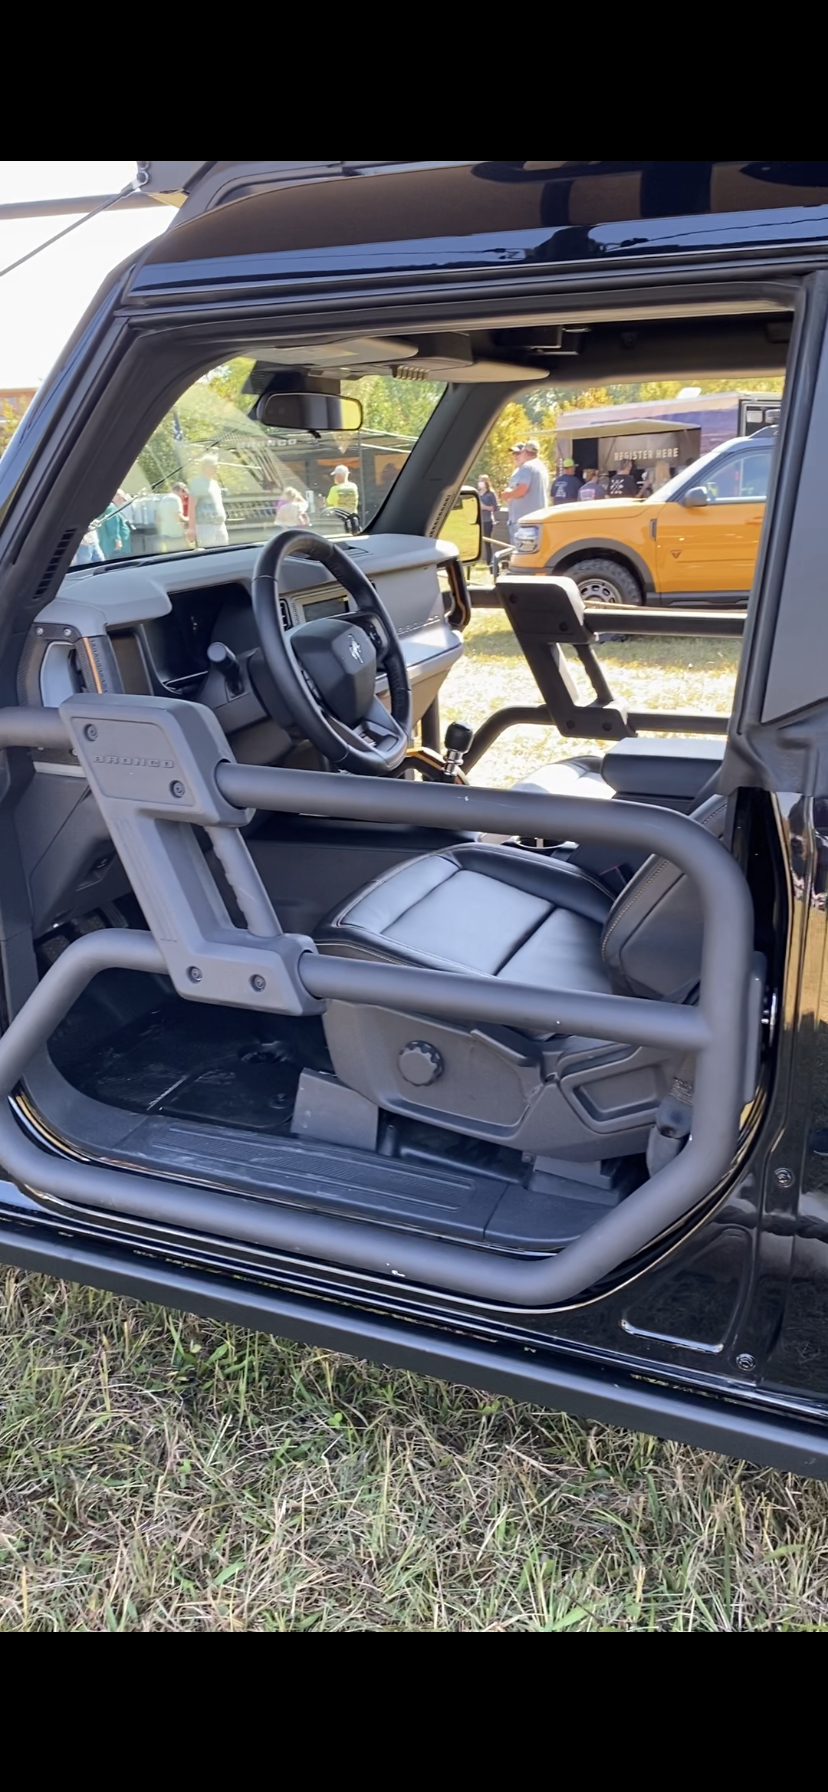 Ford Bronco Badlands with leather trimmed seats comes with carpet? 960A6364-081F-4A51-8C8E-3DBB64BA68D4